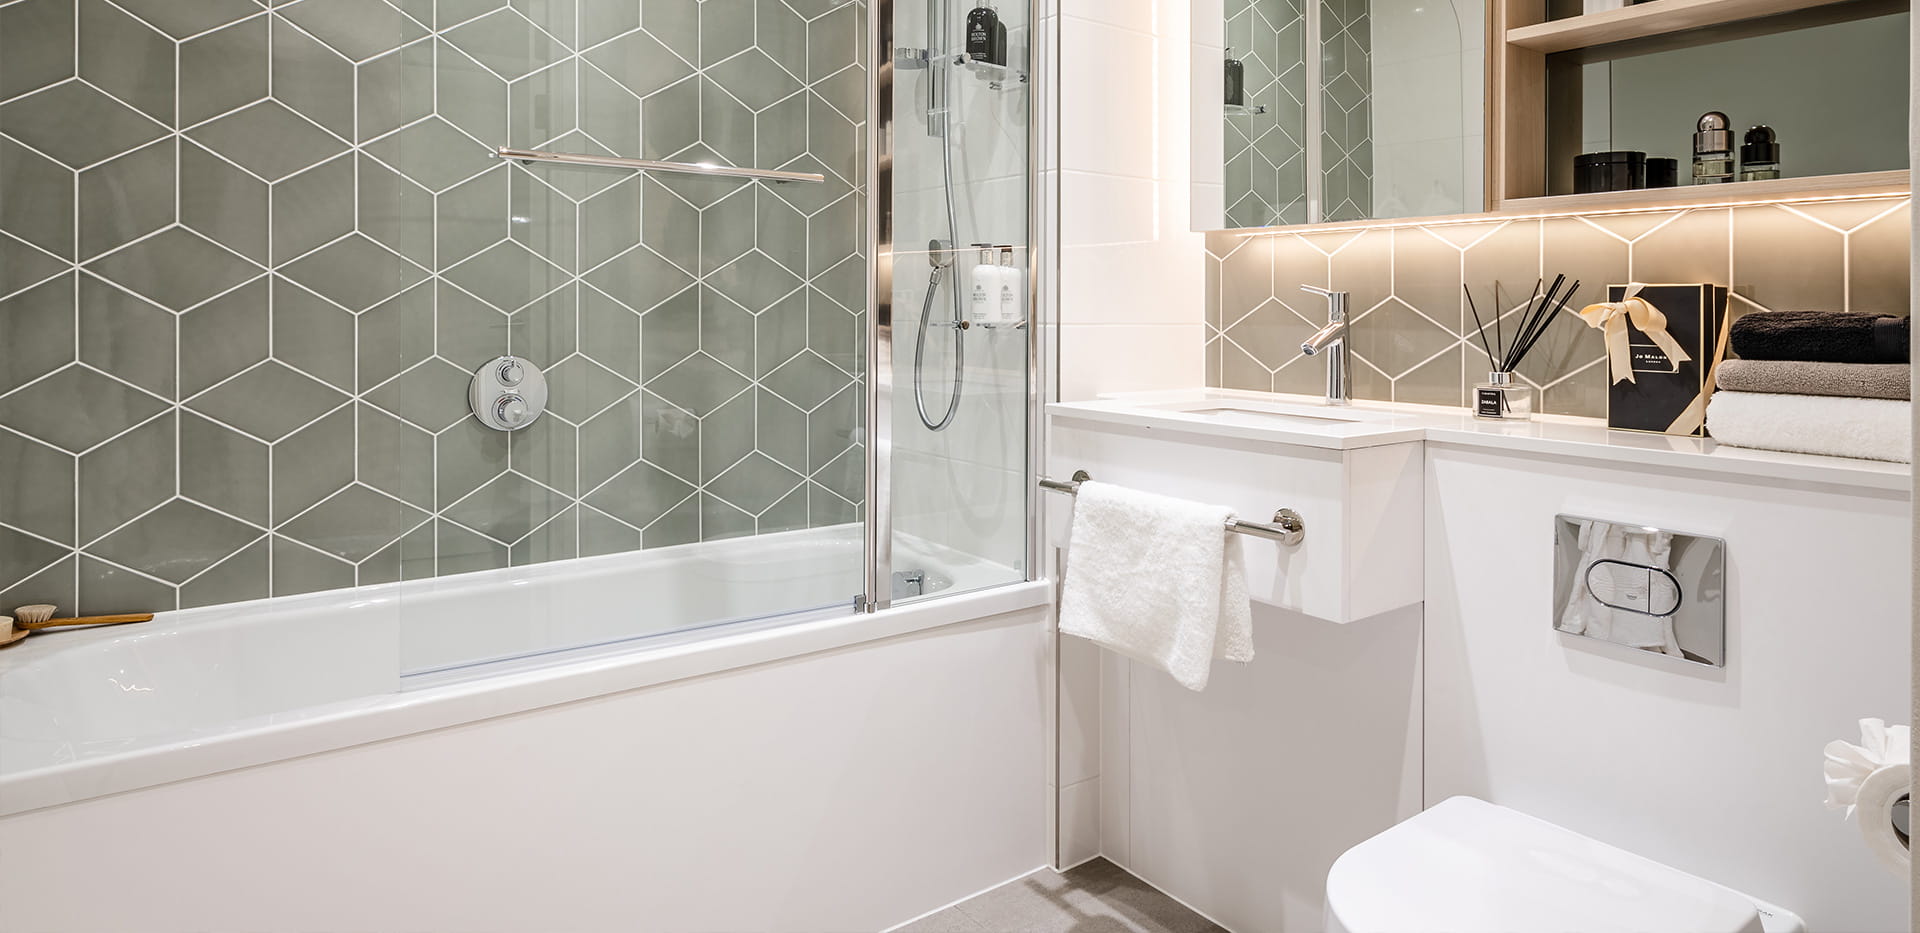 Clarendon, Alexandra Palace Gardens, One Bed Showhome - Bathroom